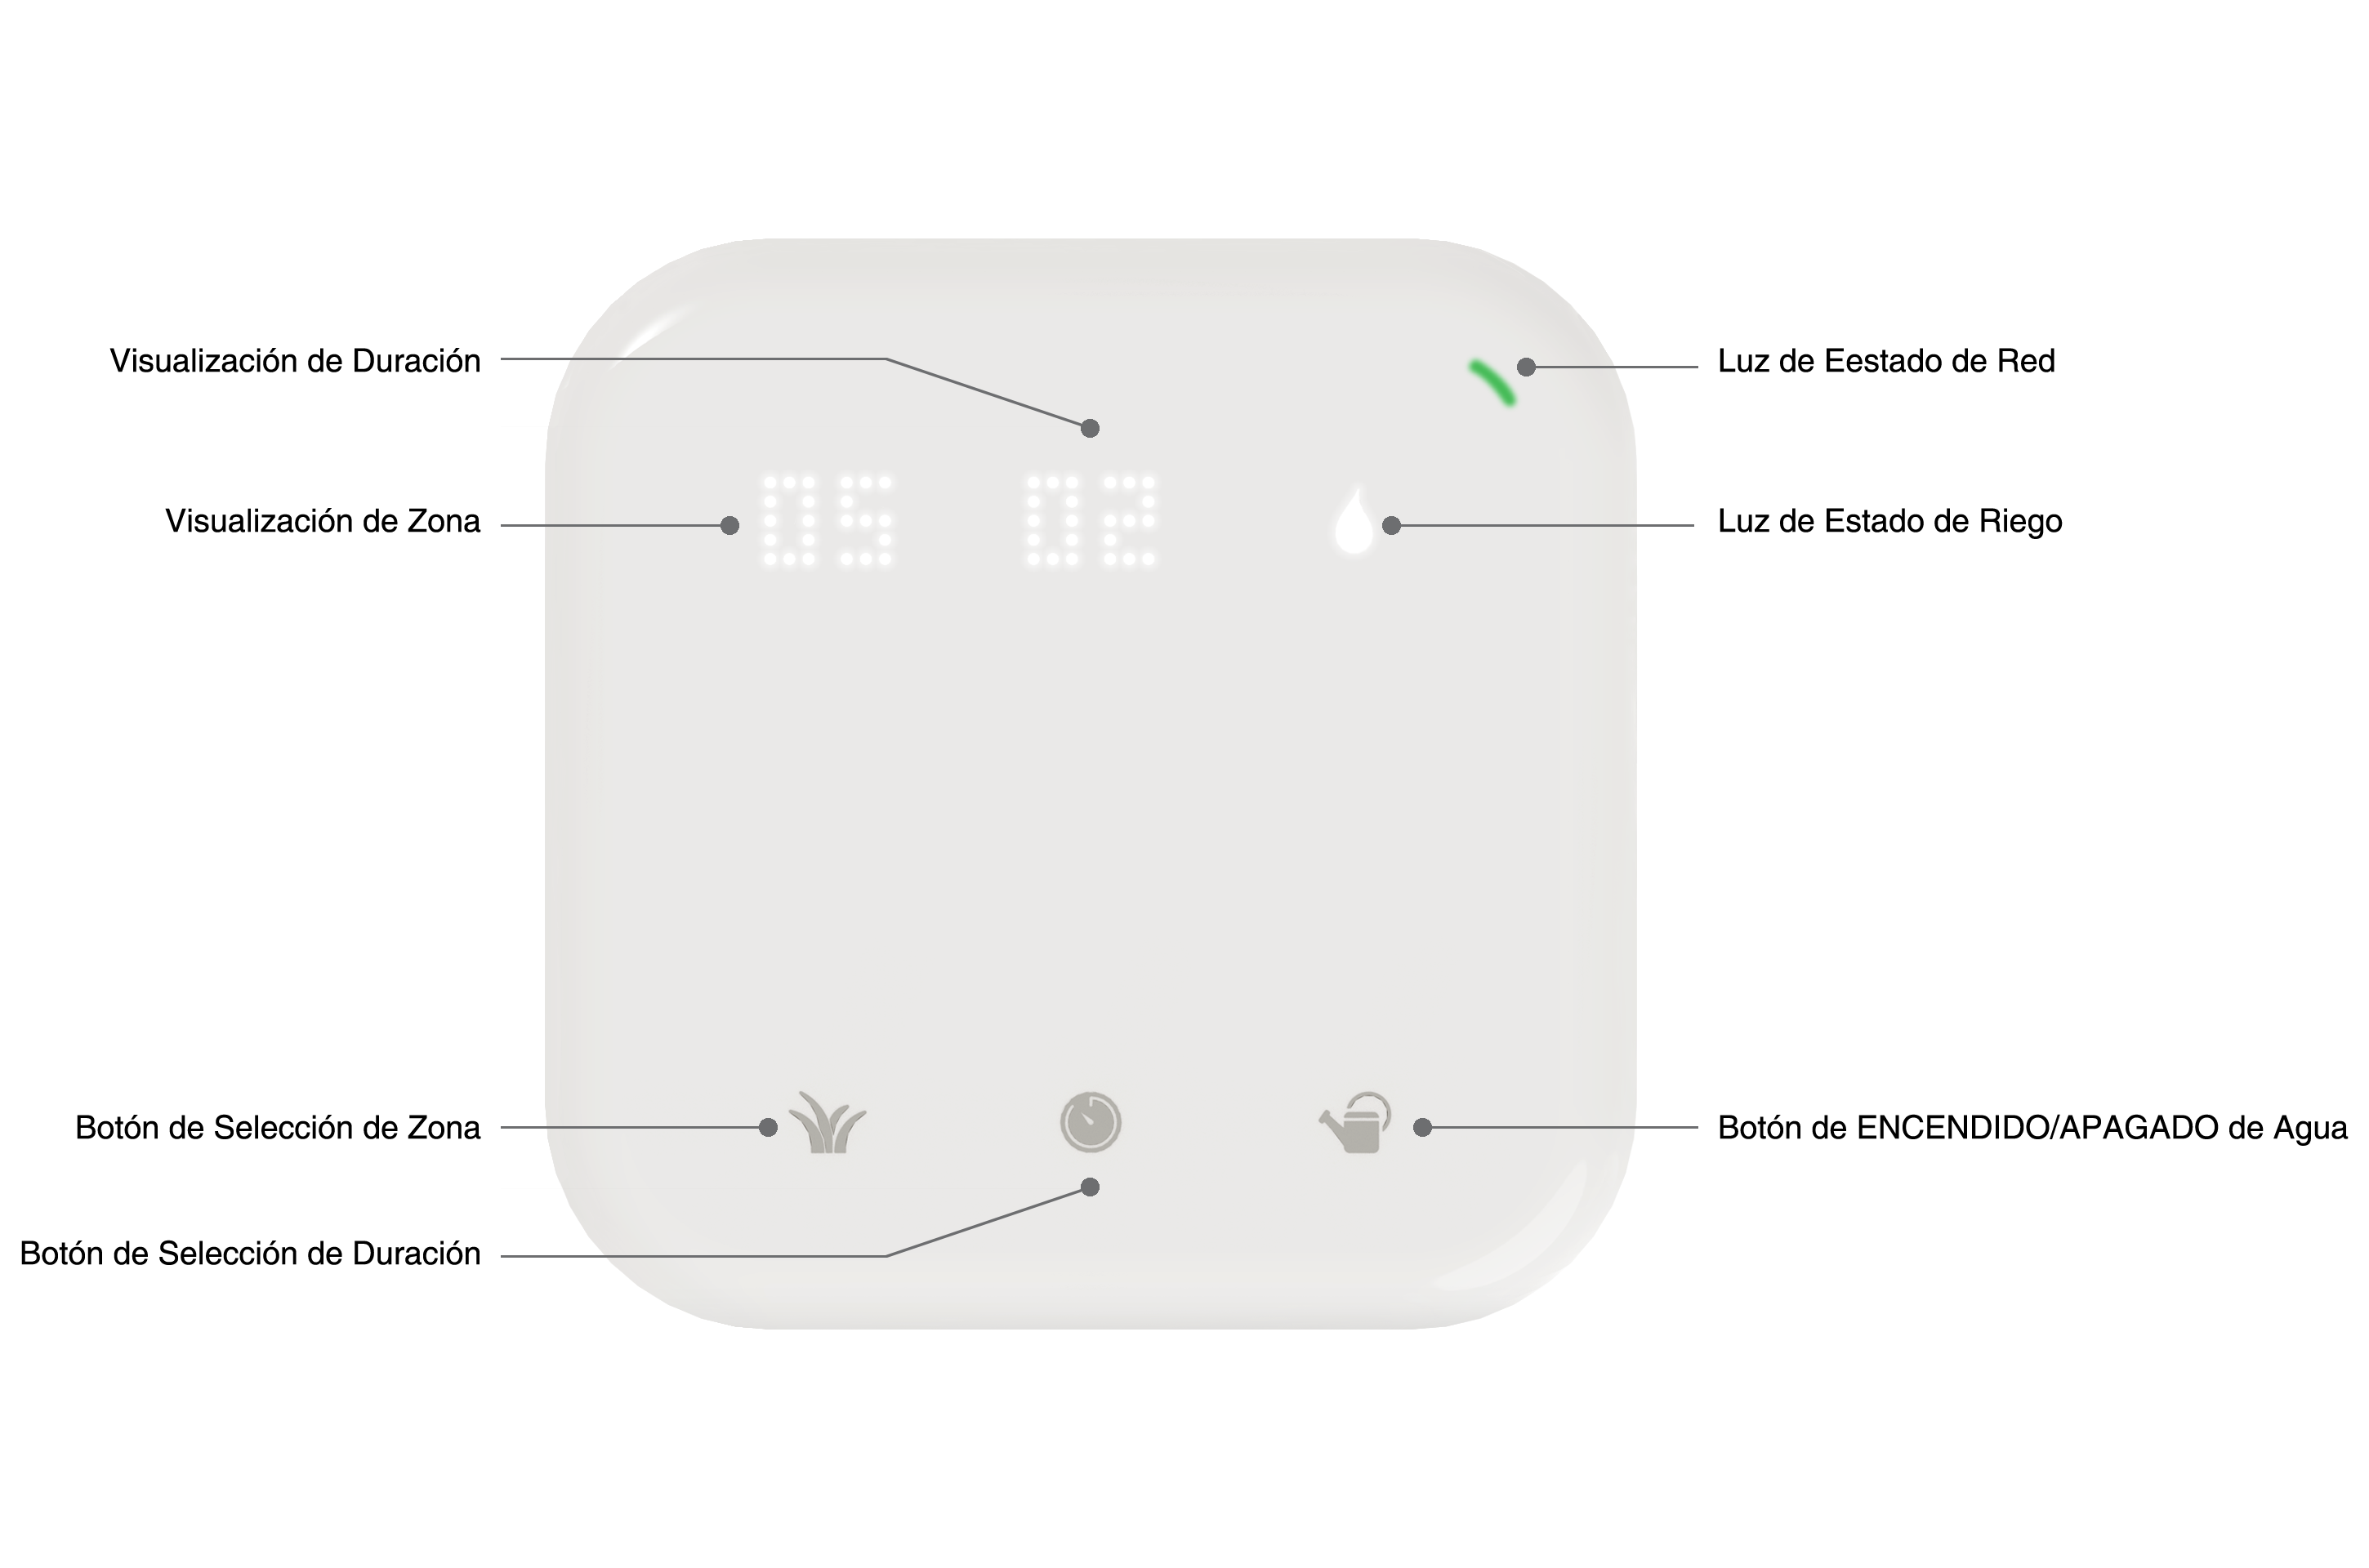 In the upper right corner of Netro Spark is a network status light. Netro Spark is touch control, and below it, there are three touch buttons: zone selection button, duration selection button and water ON/OFF button. On top of Netro Spark, there is the zone display, duration display and watering status light.